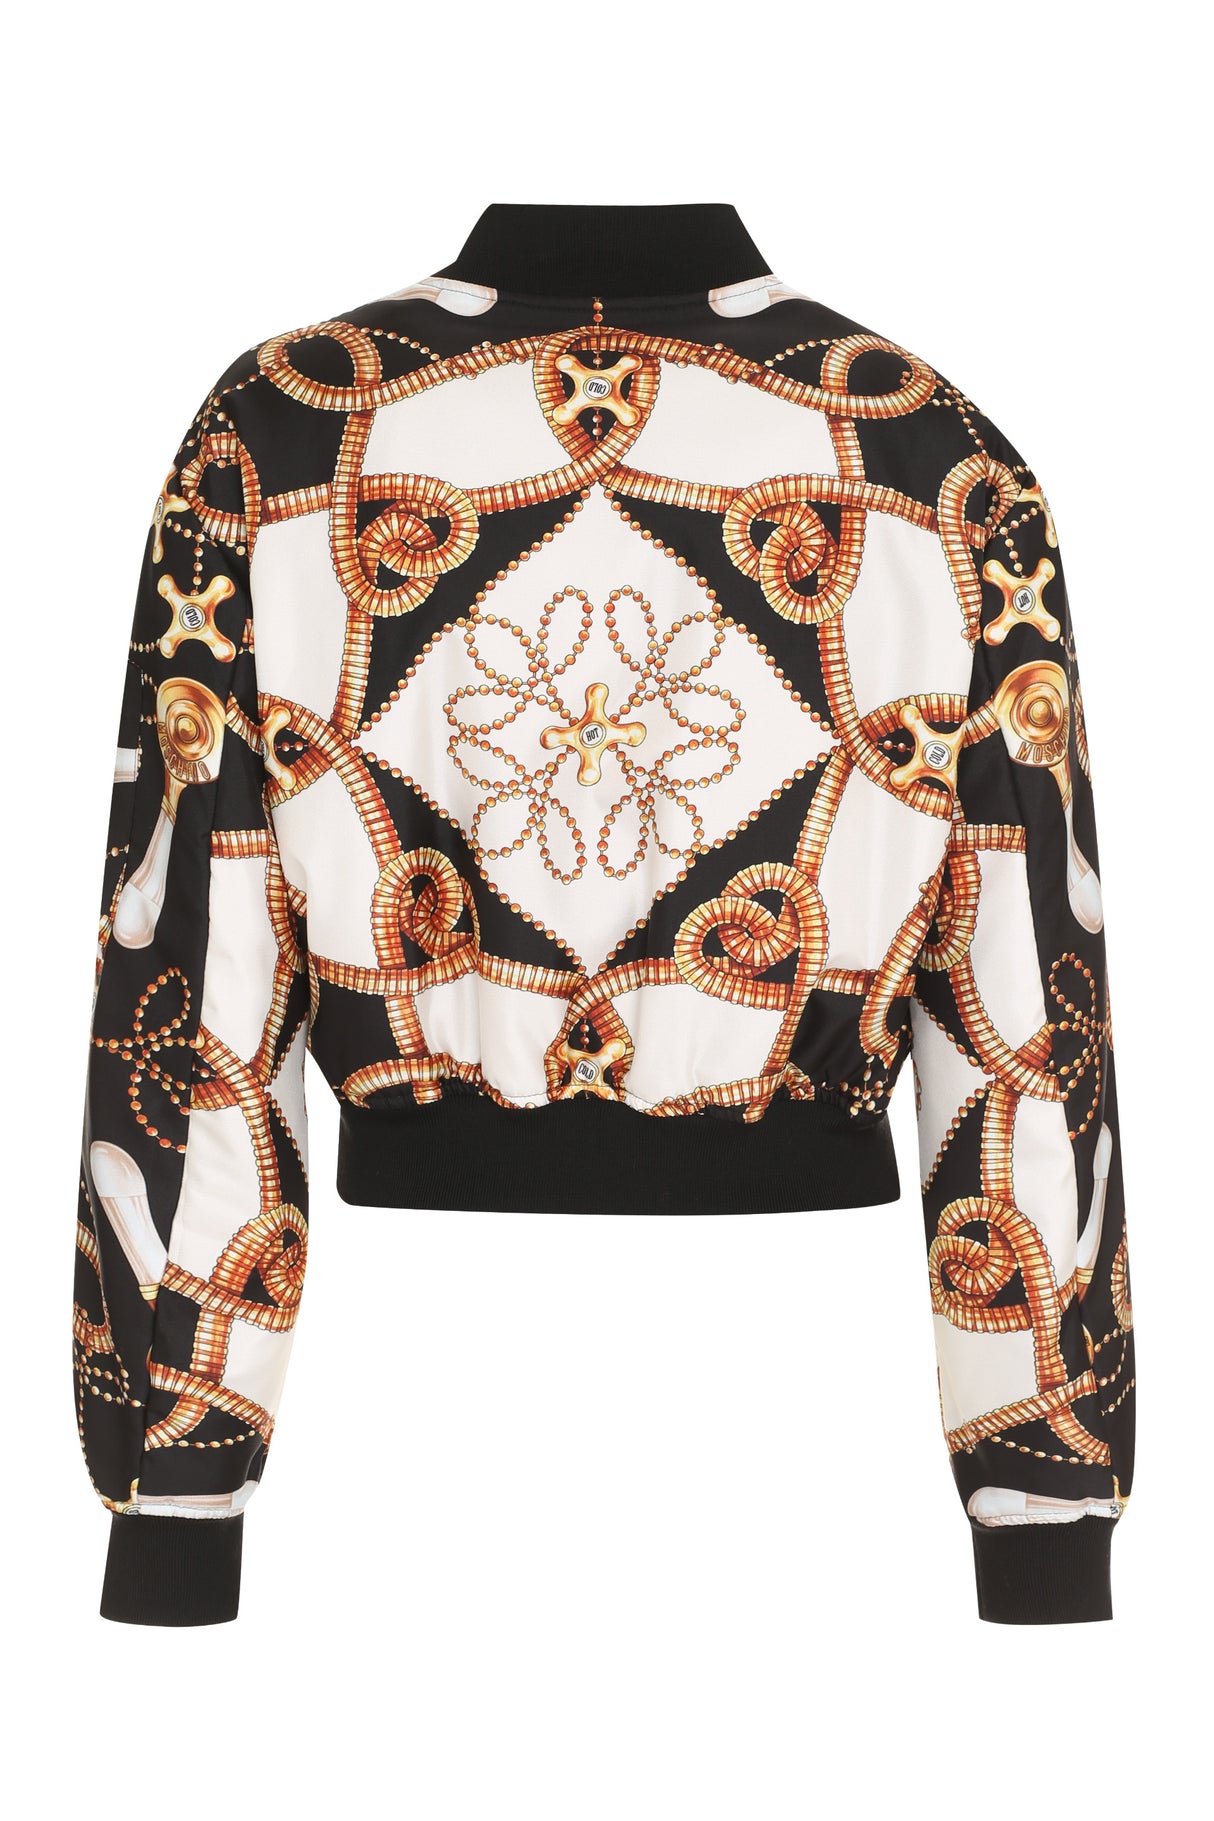 MOSCHINO COUTURE Black Printed Bomber Jacket for Women - FW22 Collection